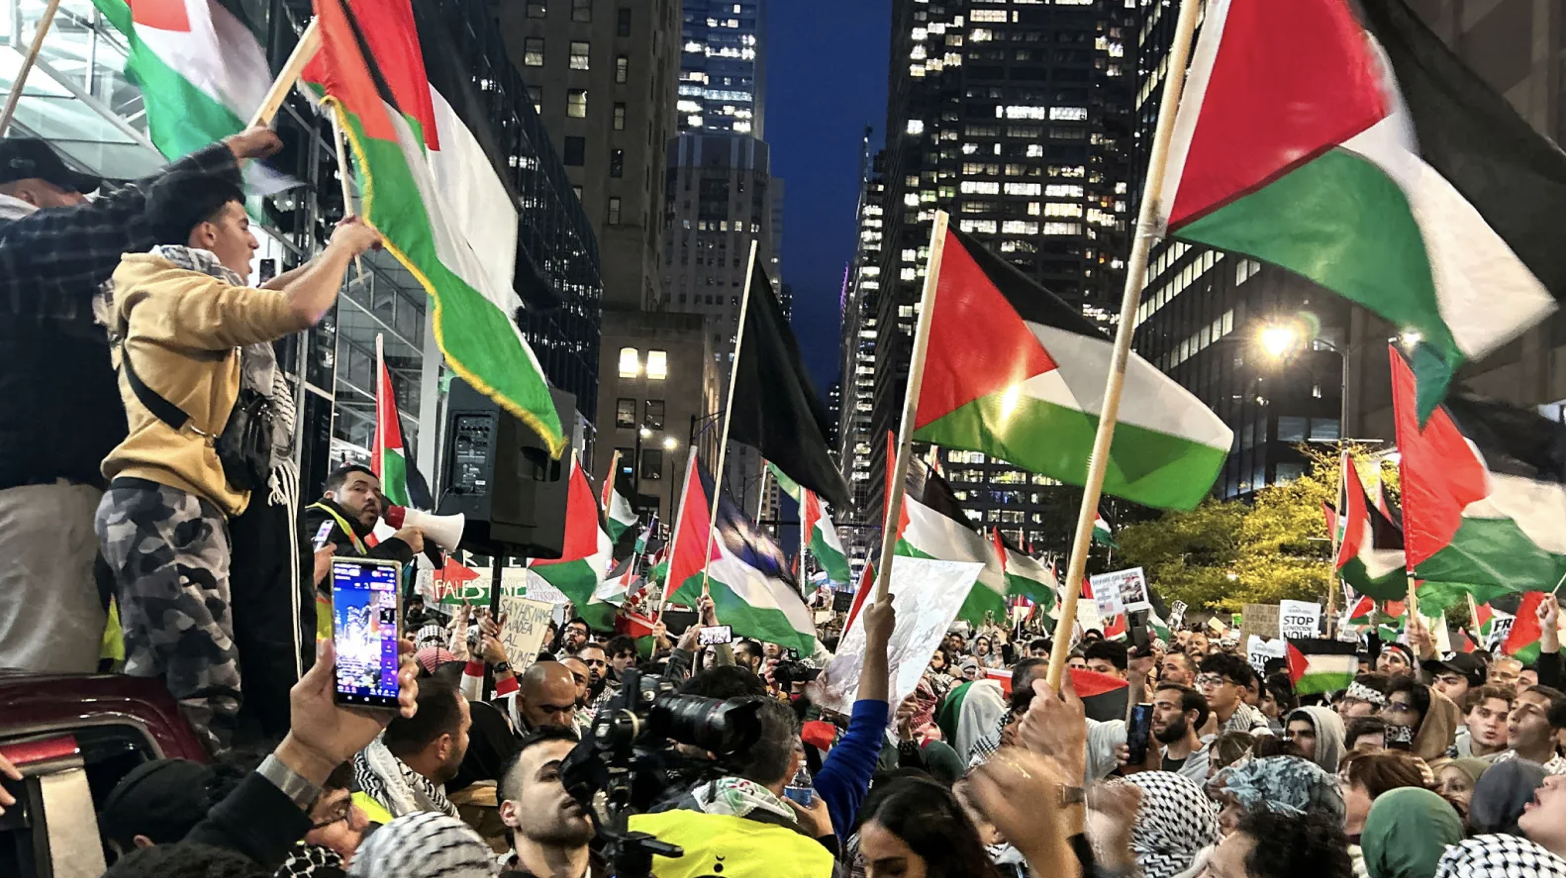 Chicago protesters in support of Palestinians & Hamas